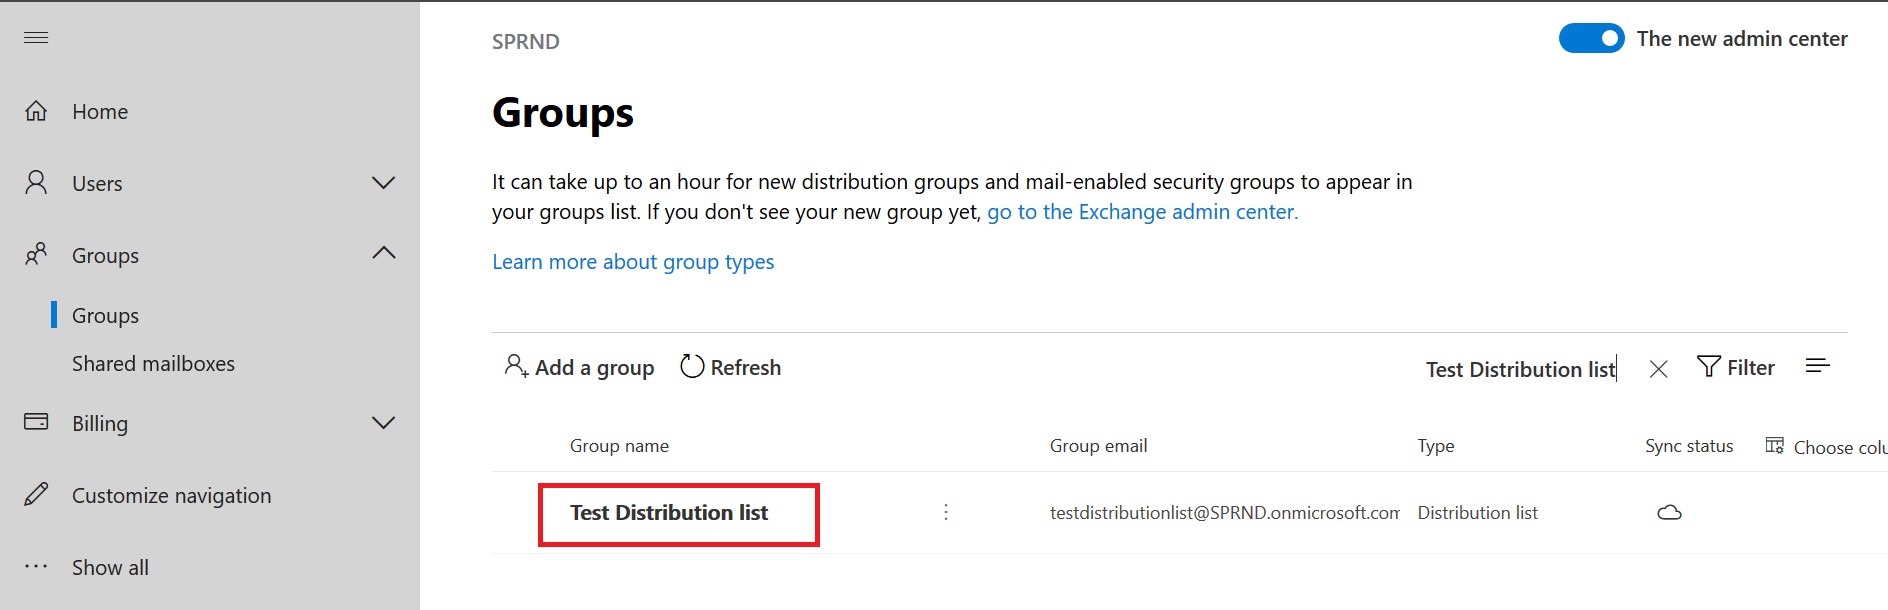 Security groups in office 365 - groups in Microsoft 365